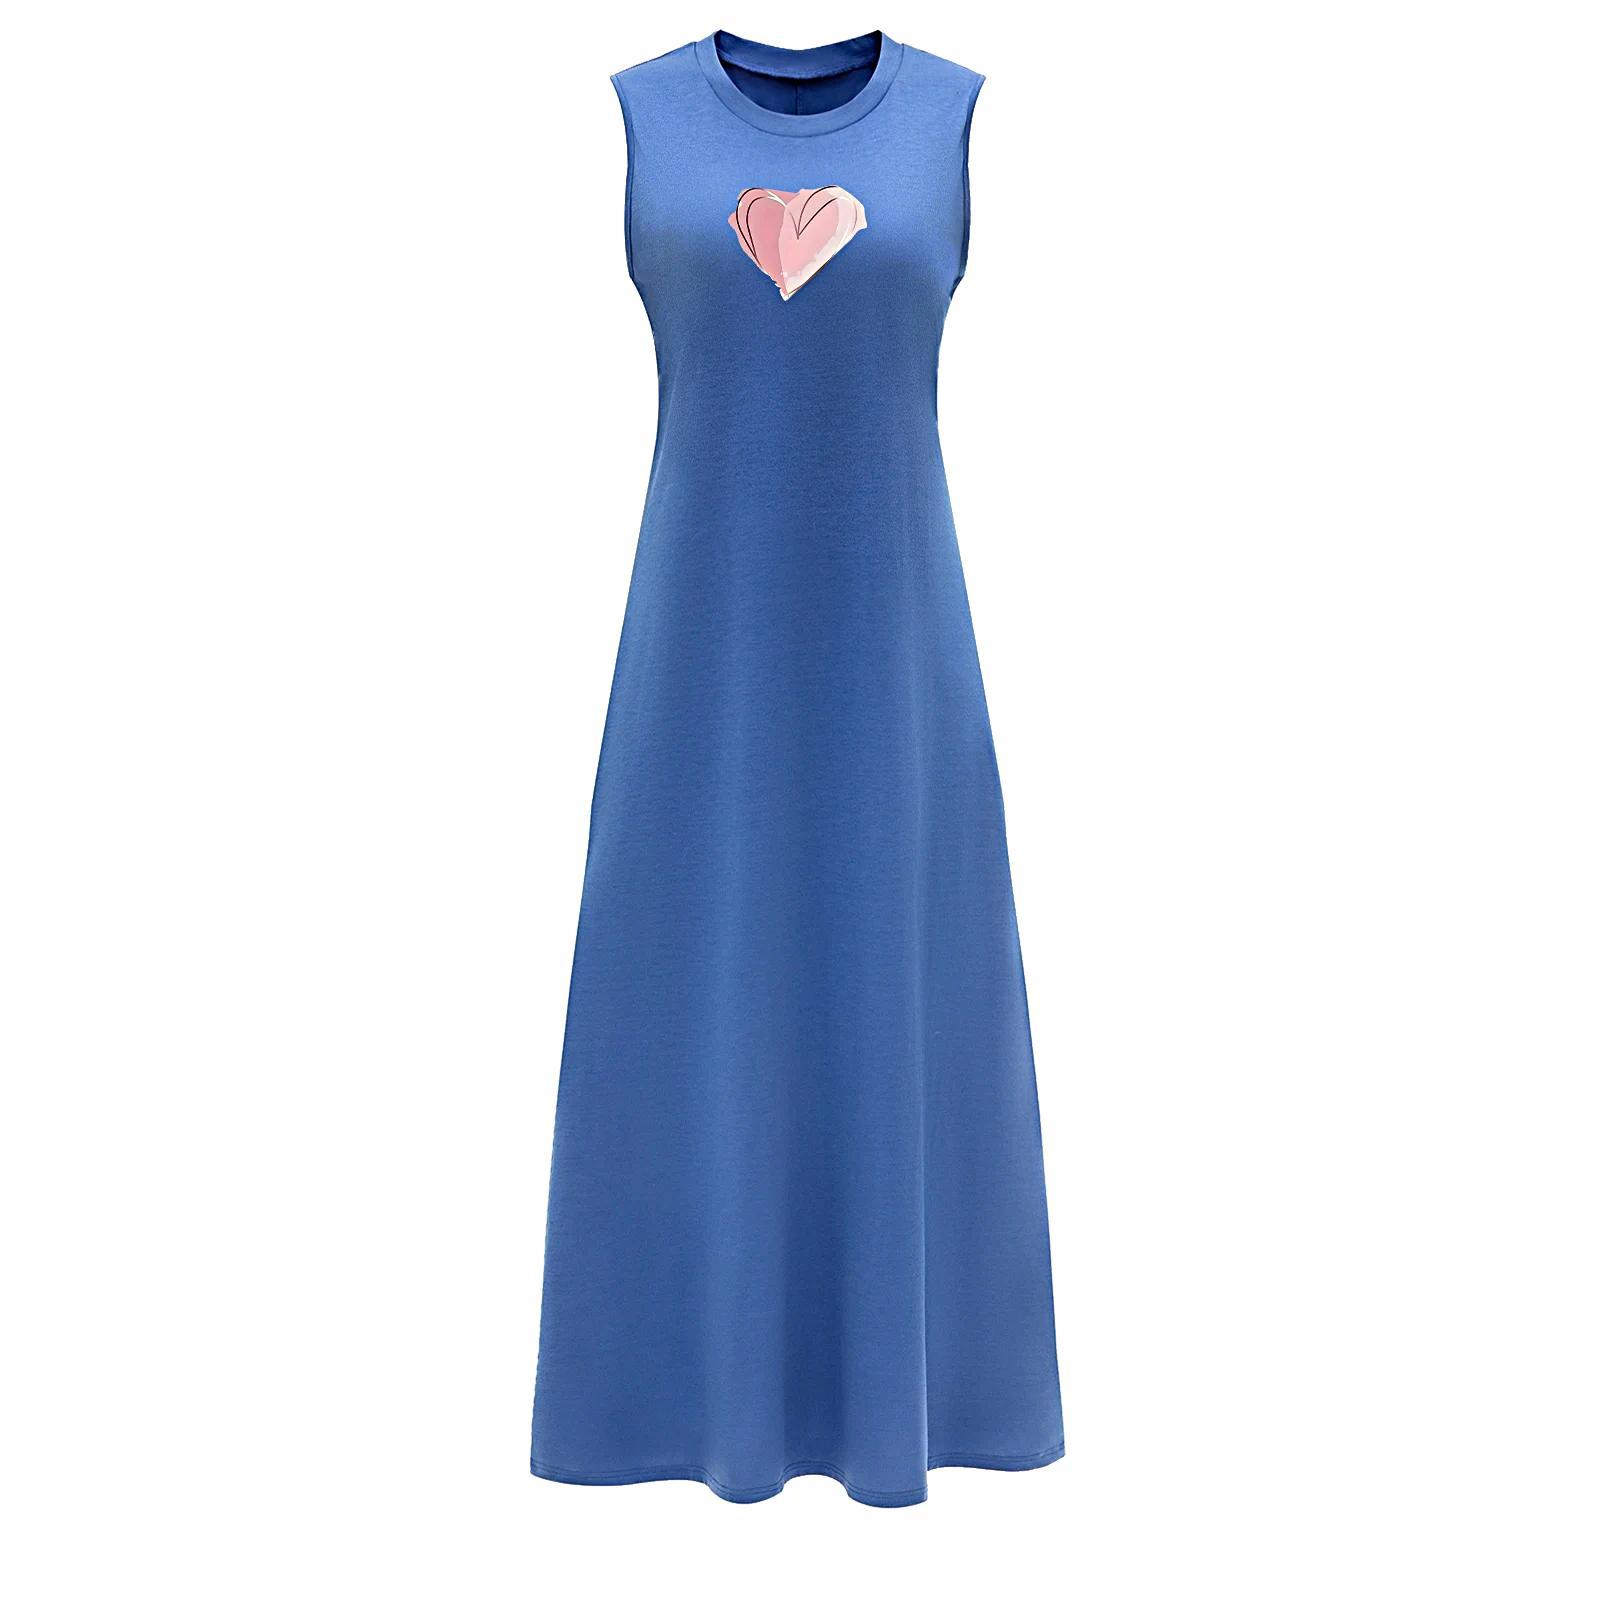 Women's Long Summer Dress Spring Casual Dress for Going Out Street Commuting M